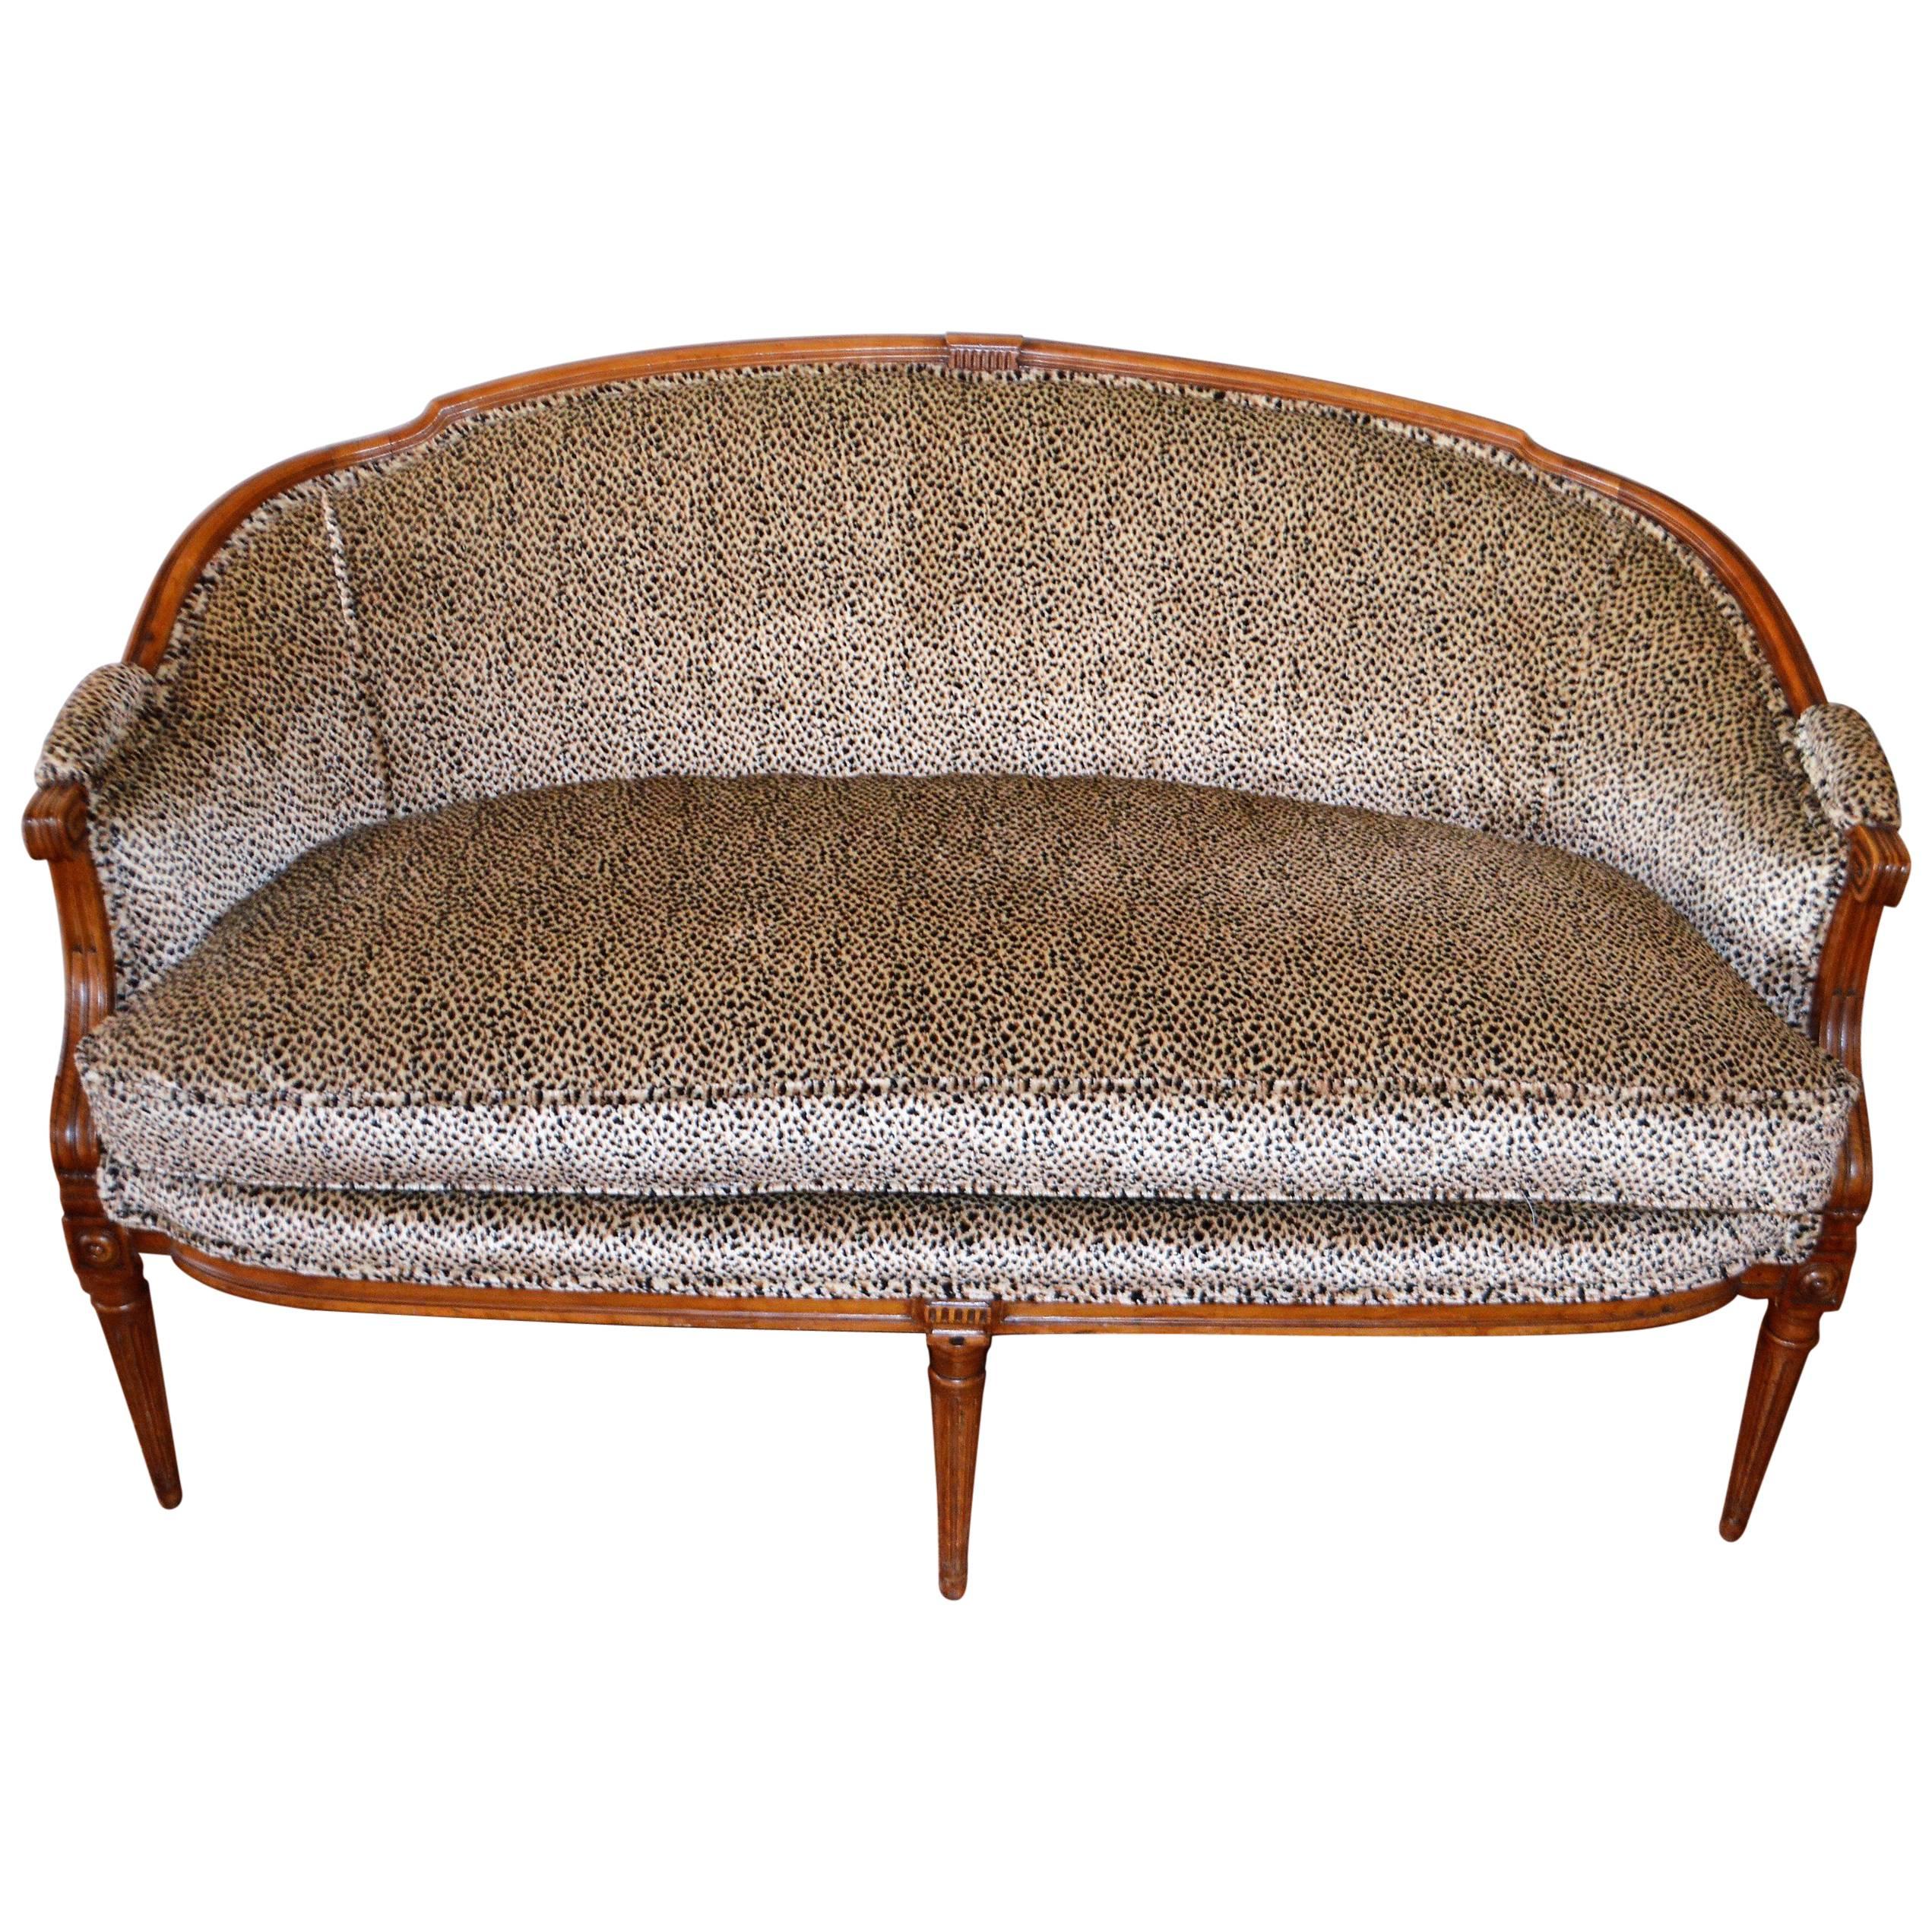 Louis XVI Style Walnut Sofa Newly Upholstered in a Leopard Pattern Chenille